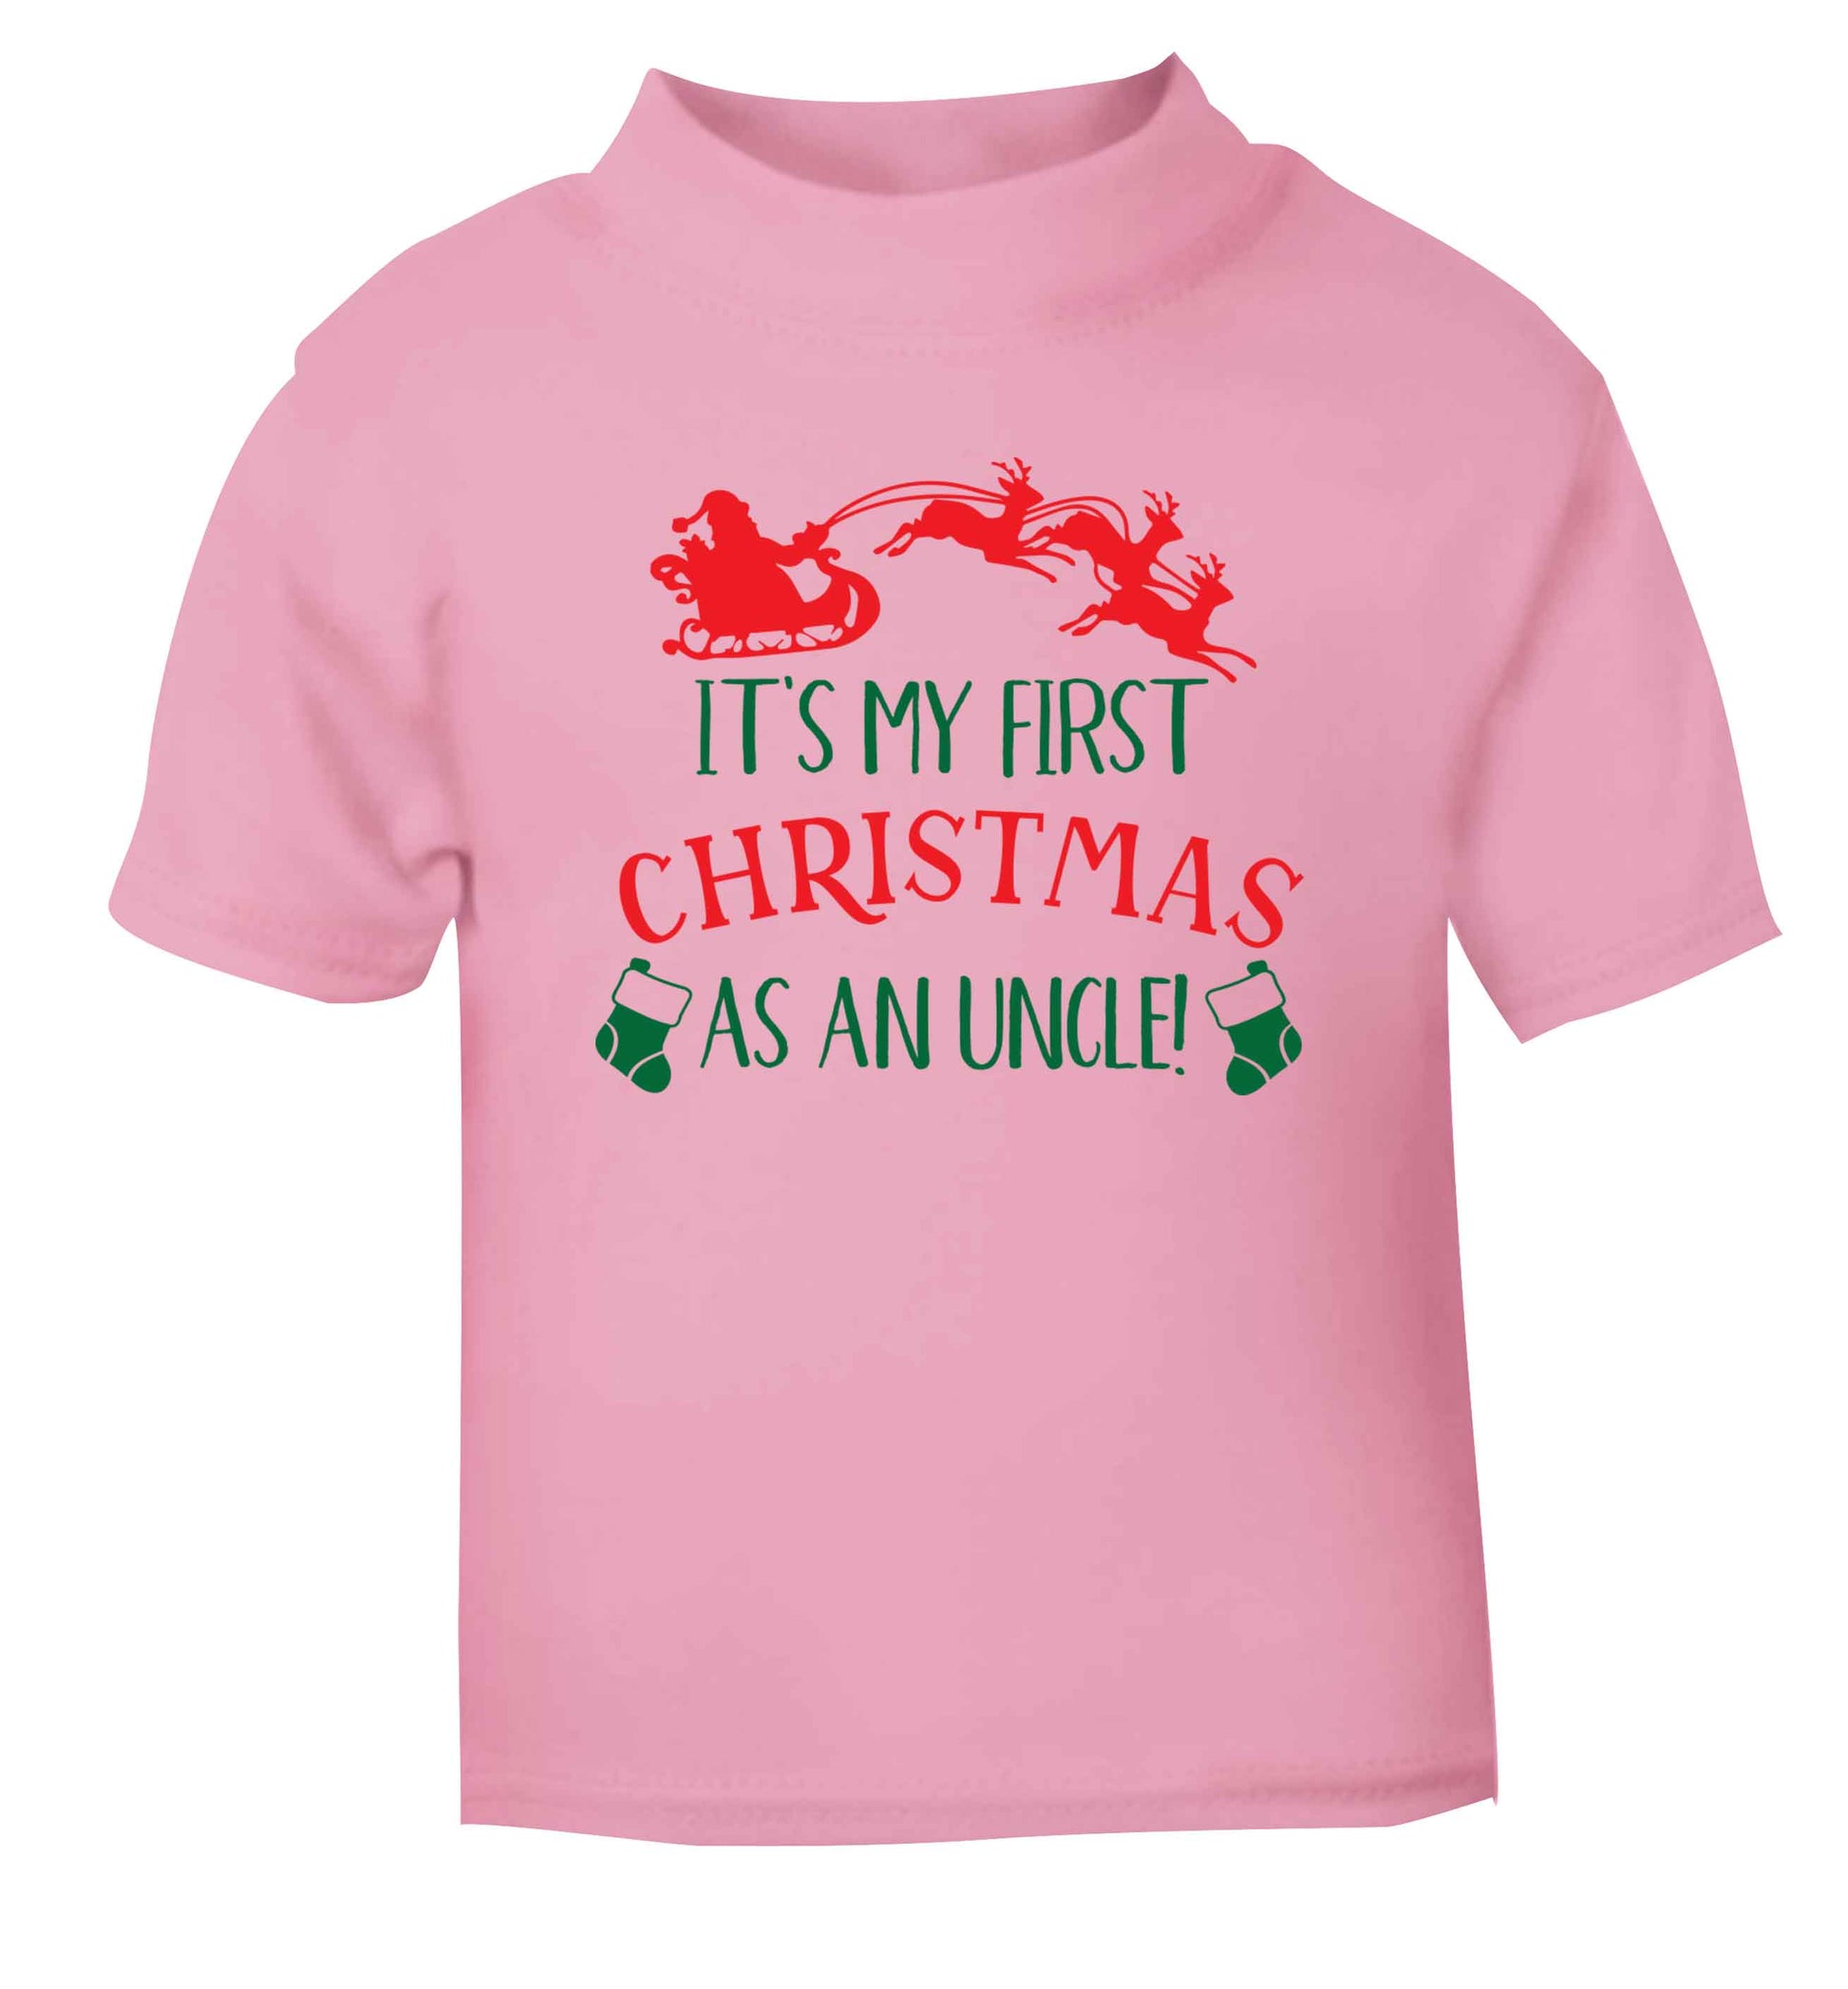 It's my first Christmas as an uncle! light pink Baby Toddler Tshirt 2 Years